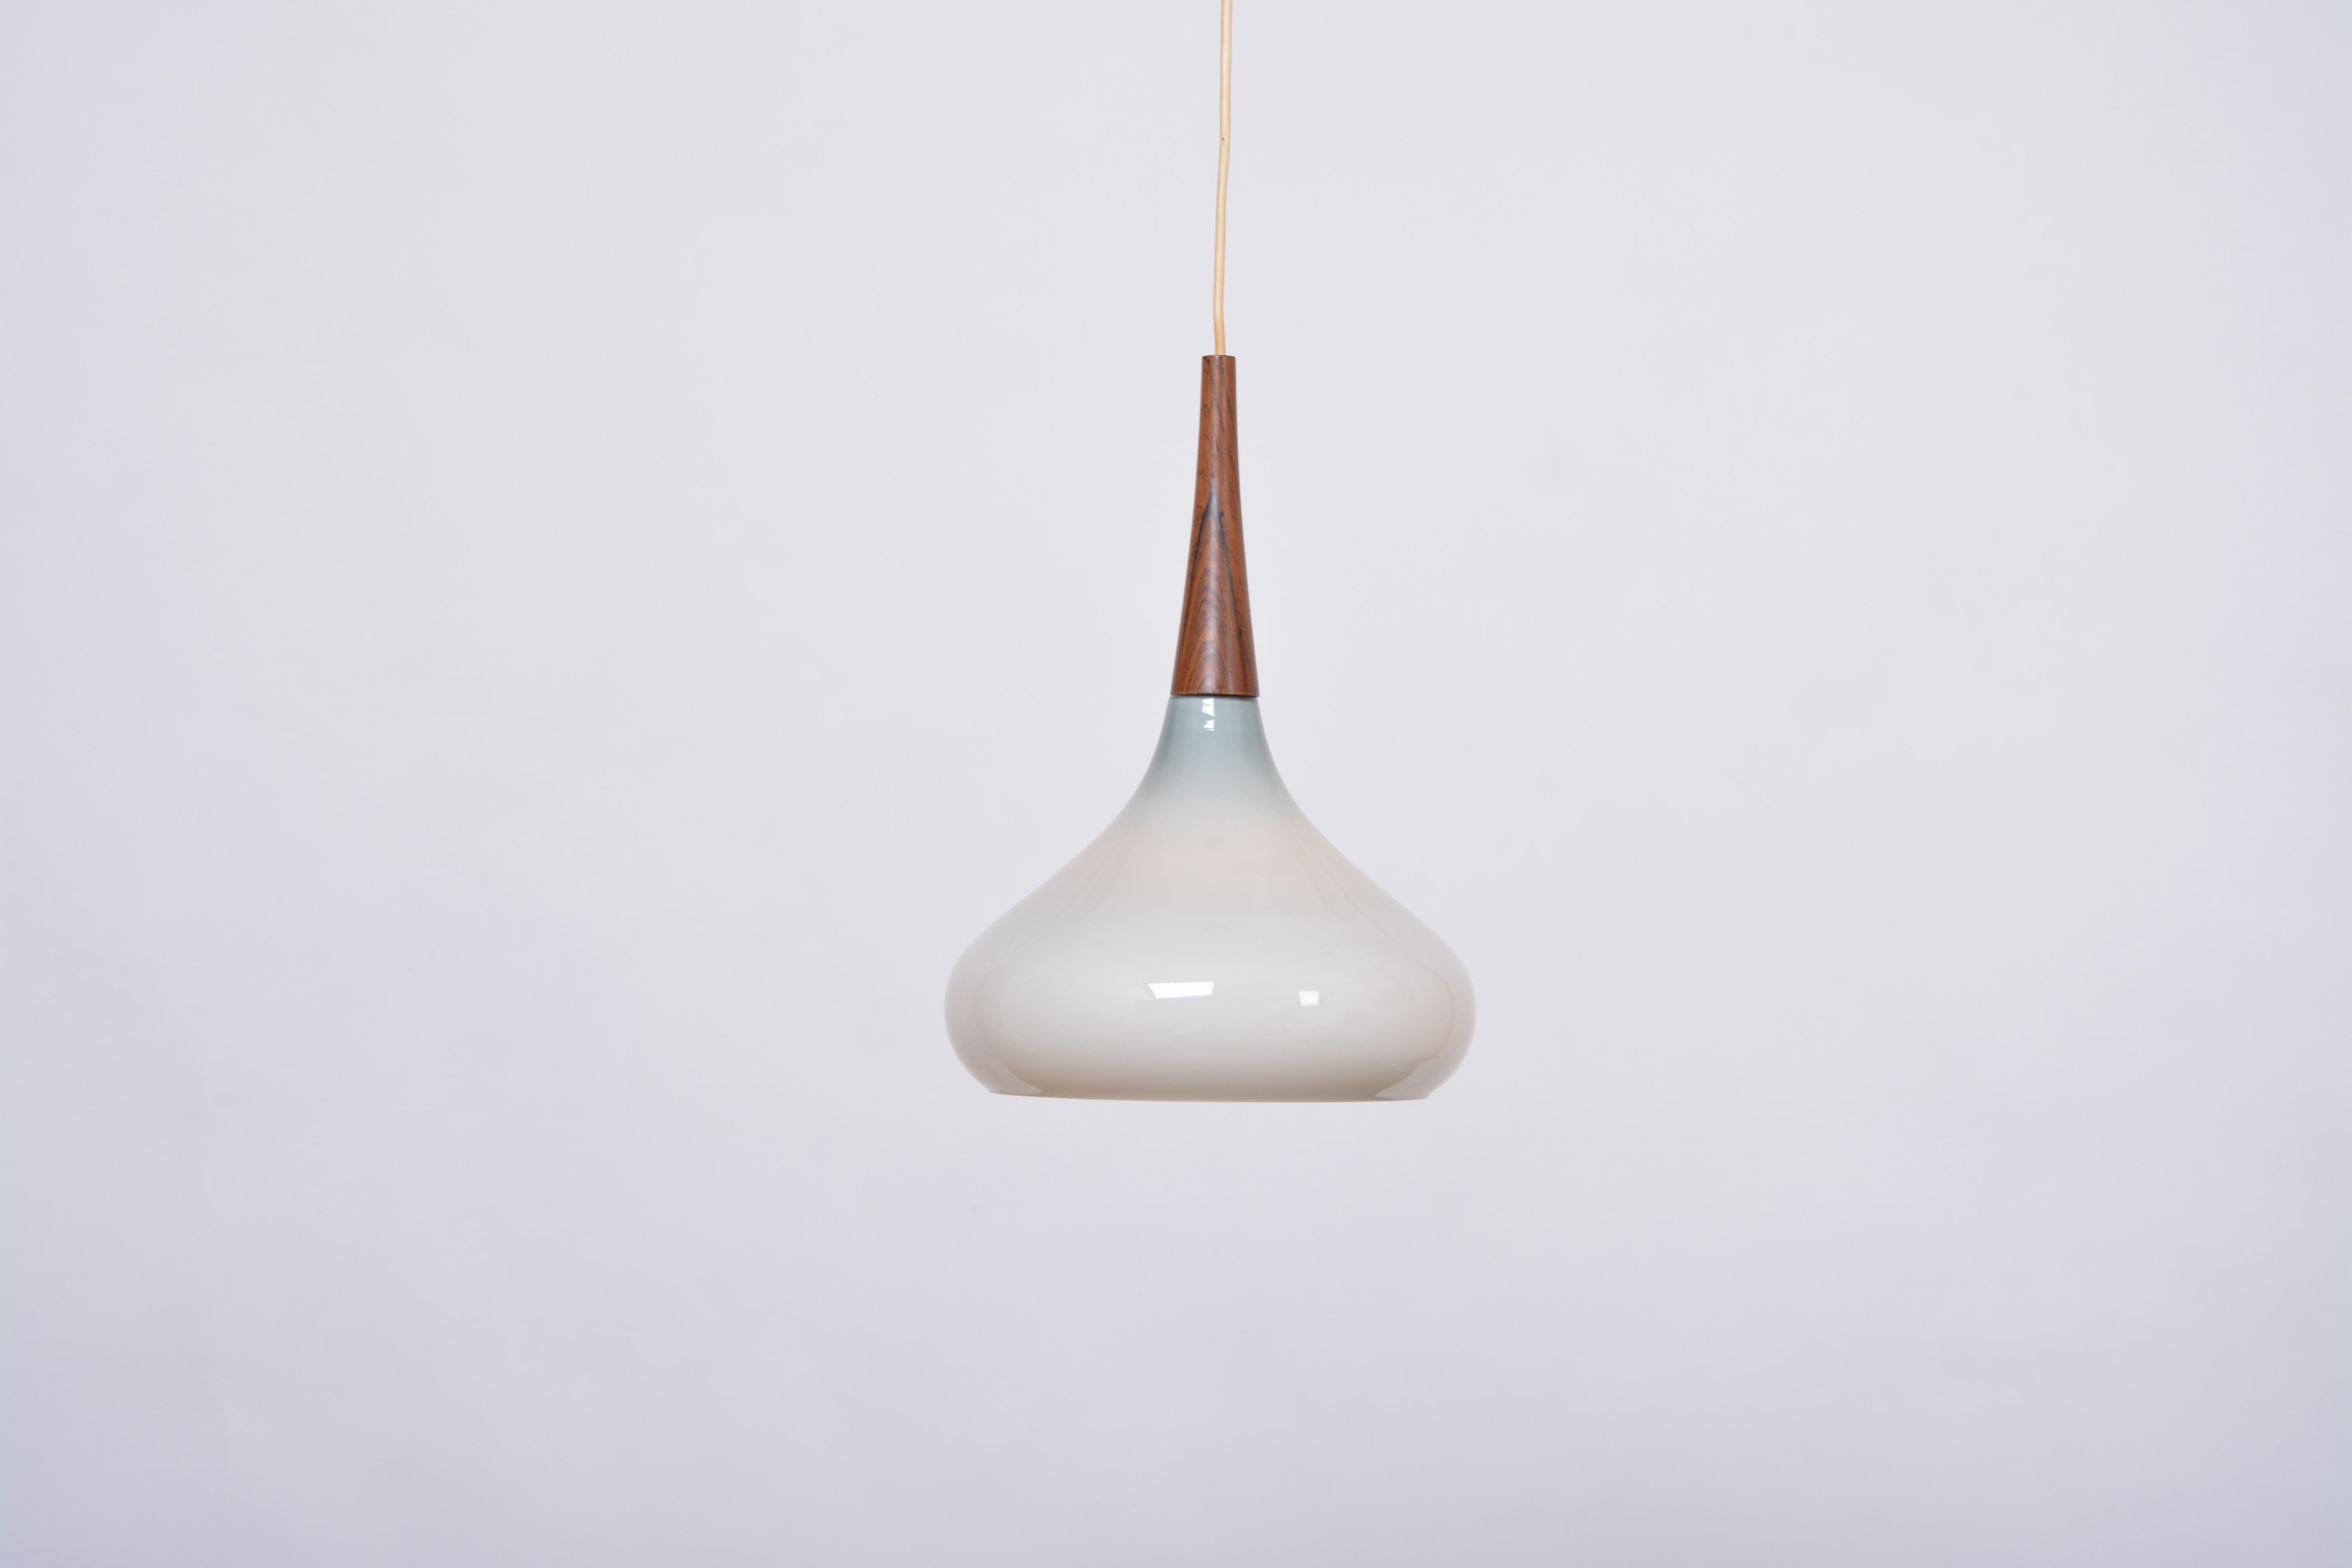 Vintage Danish Mid-Century Modern Pendant Lamp in Opaline Glass by Holmegaard

A rare hand-blown cased white opaline glass pendant light produced in the 1960s in Denmark by Holmegaard. This pendant is an ode to fine craftsmanship. The curvy organic